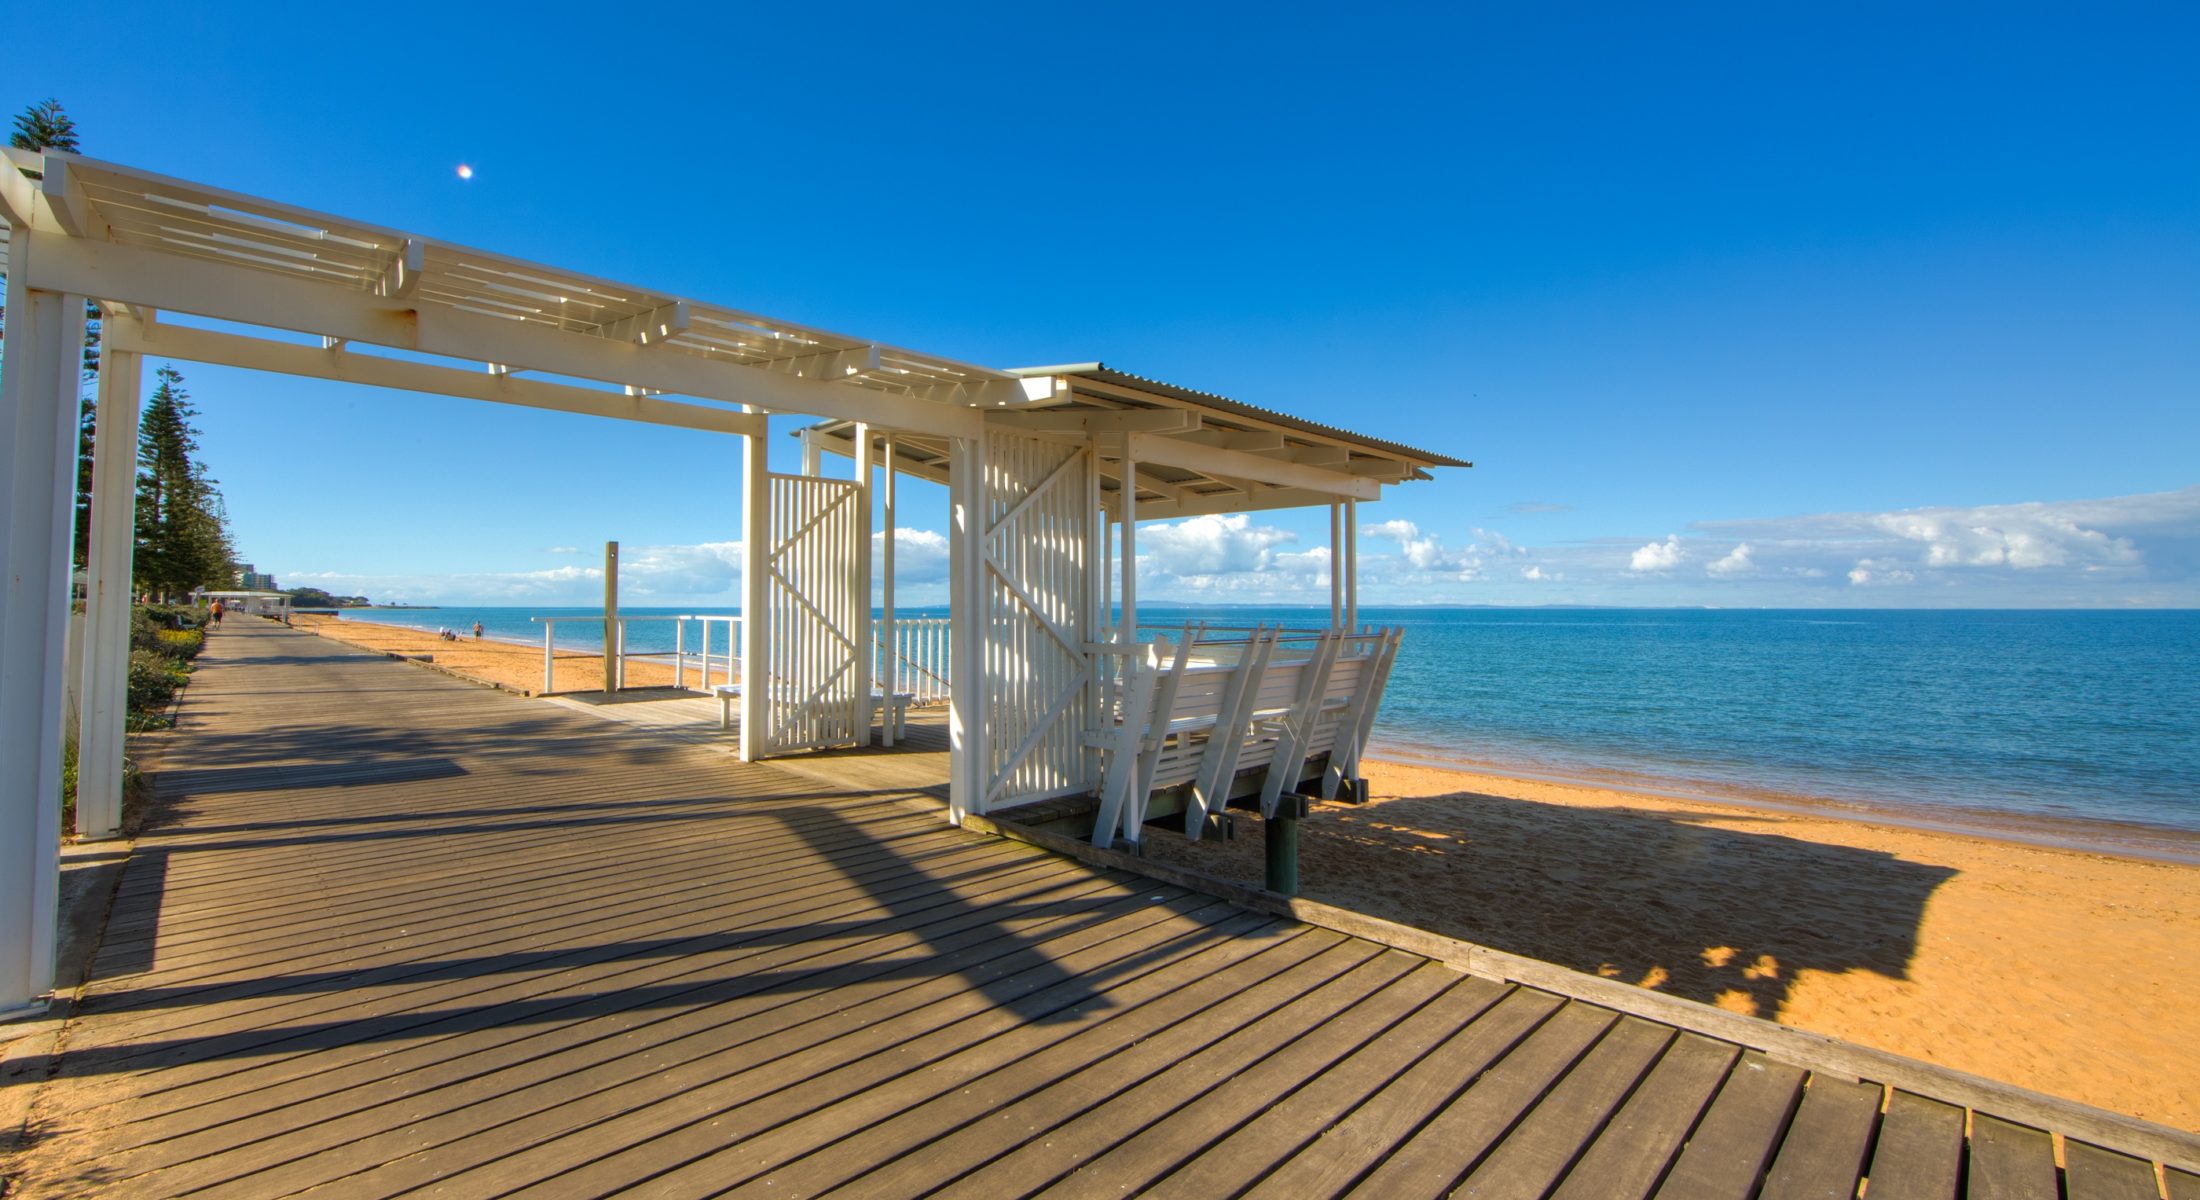 Margate Beach has a lovely boardwalk with shady shelters to stop, rest and take in the views of the Moreton Bay Marine Park